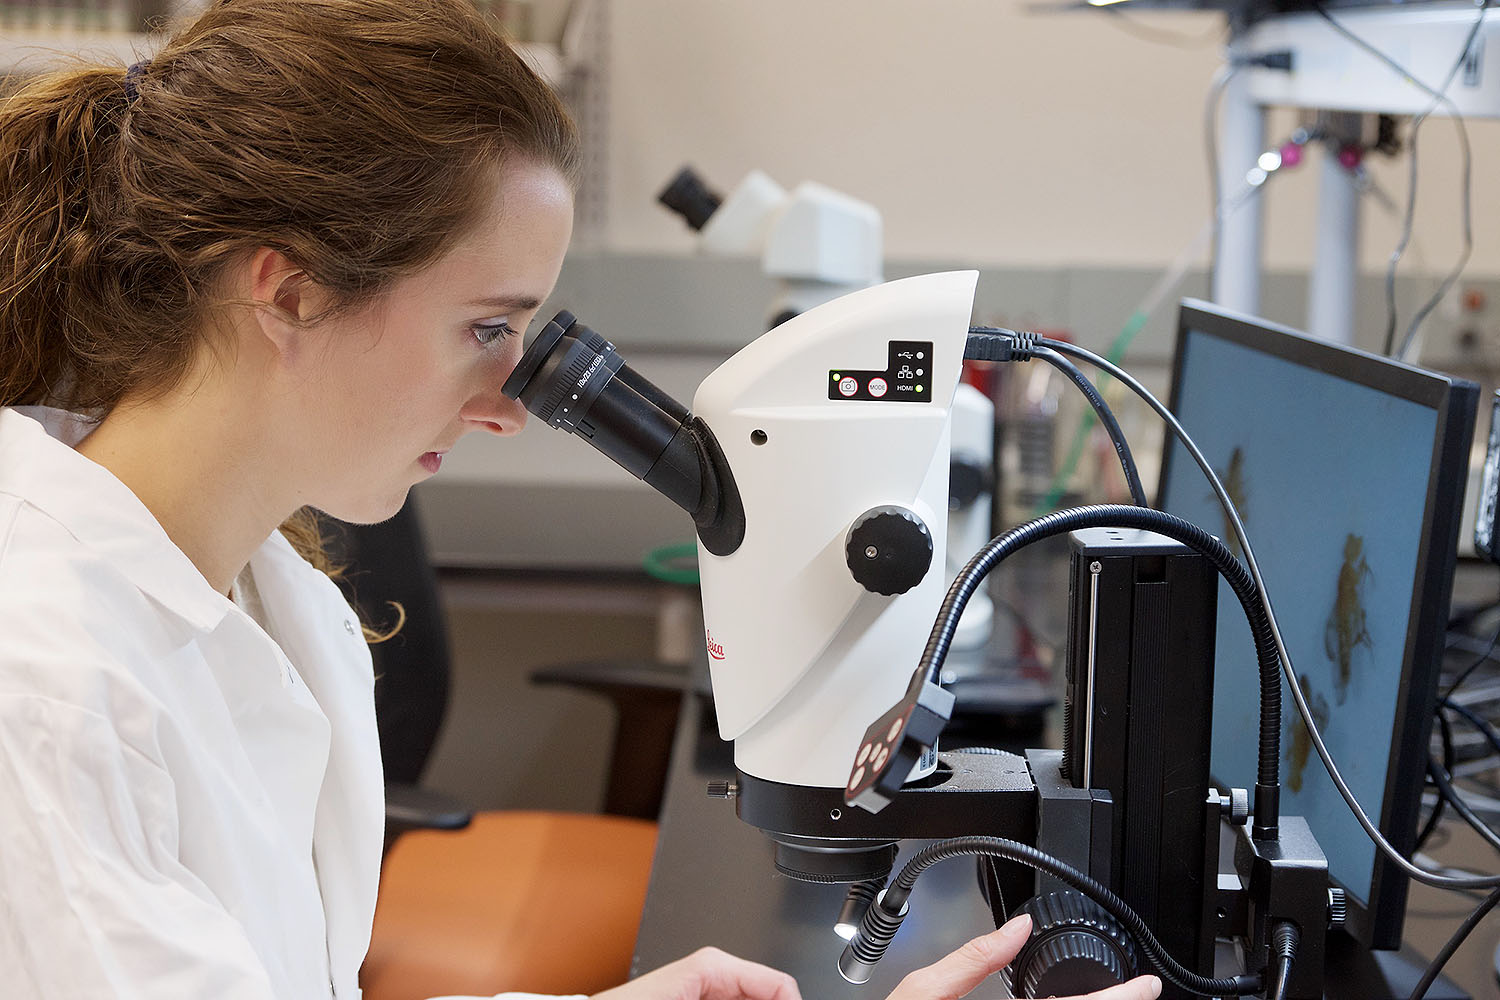 Grad student working in lab using microscope.